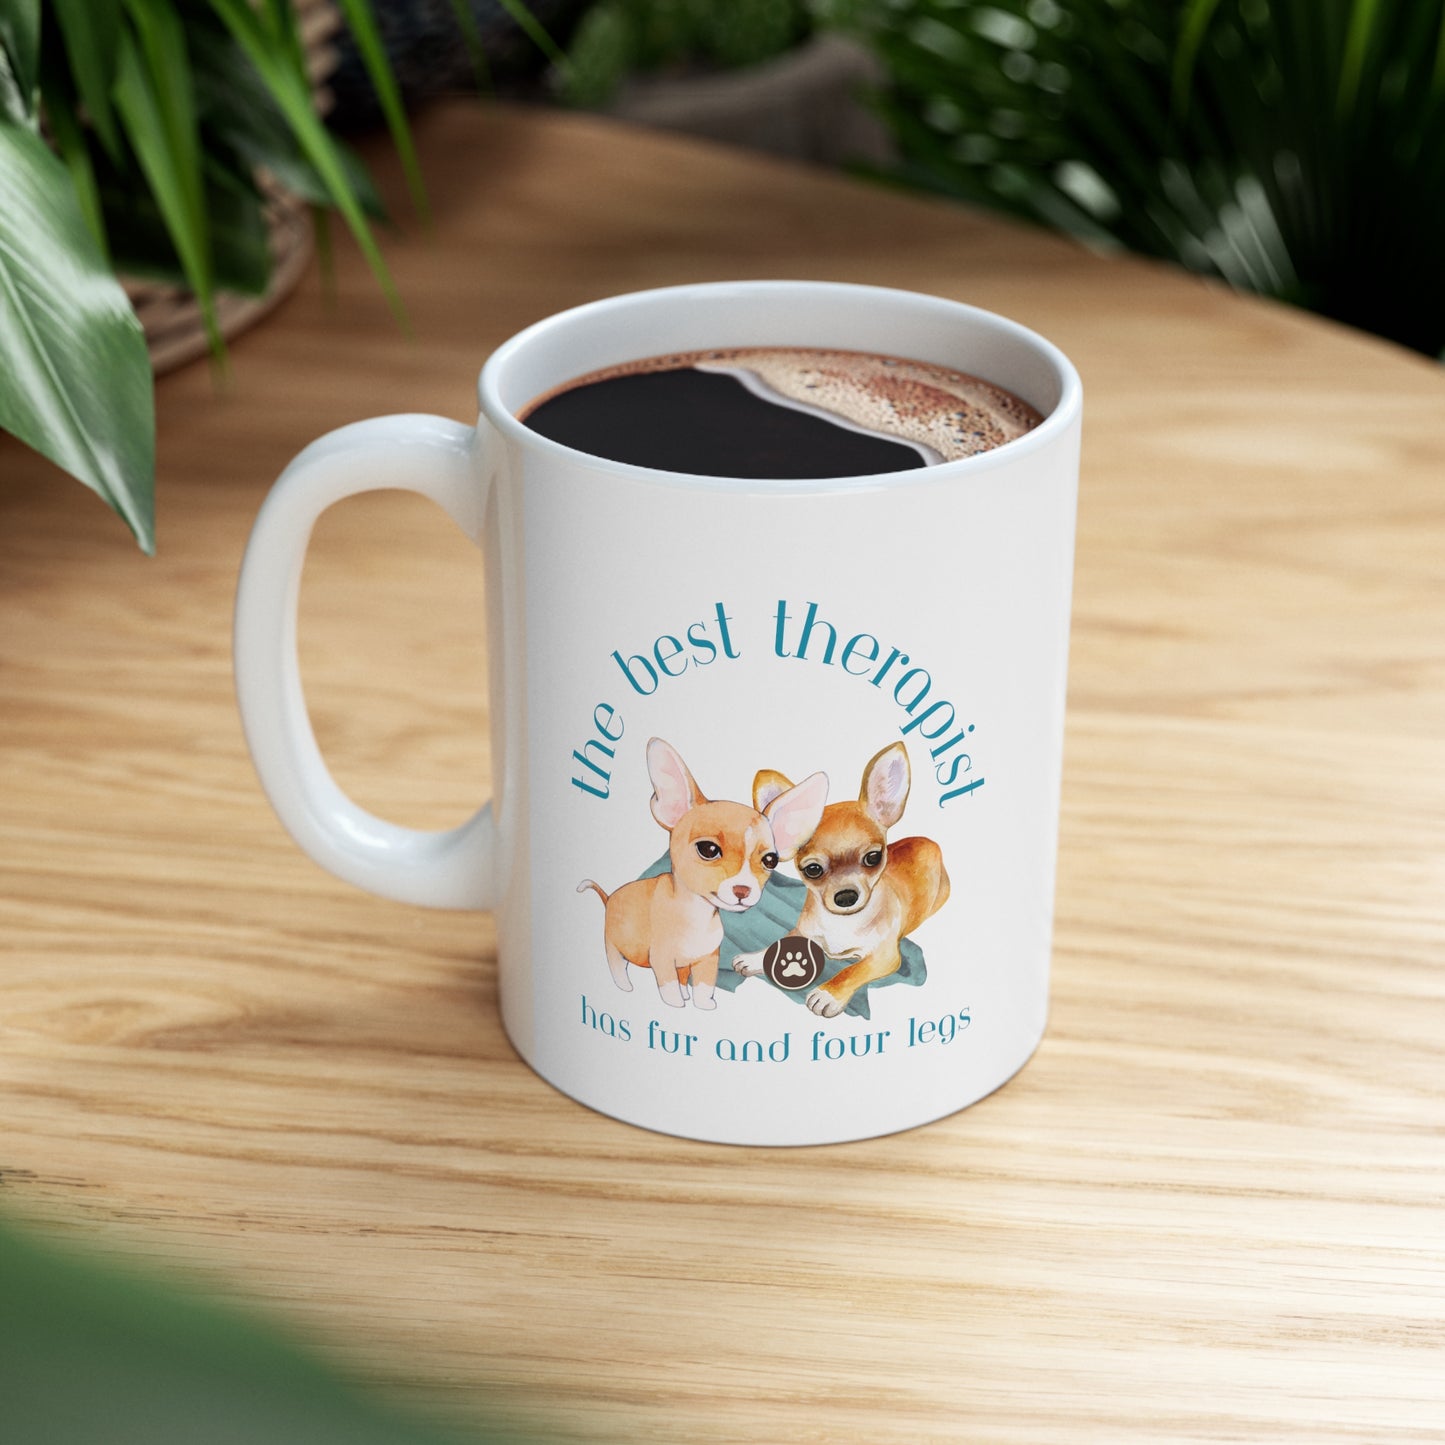 The Best Therapist Has Fur and Four Legs, Chihuahua Ceramic Mug 11oz